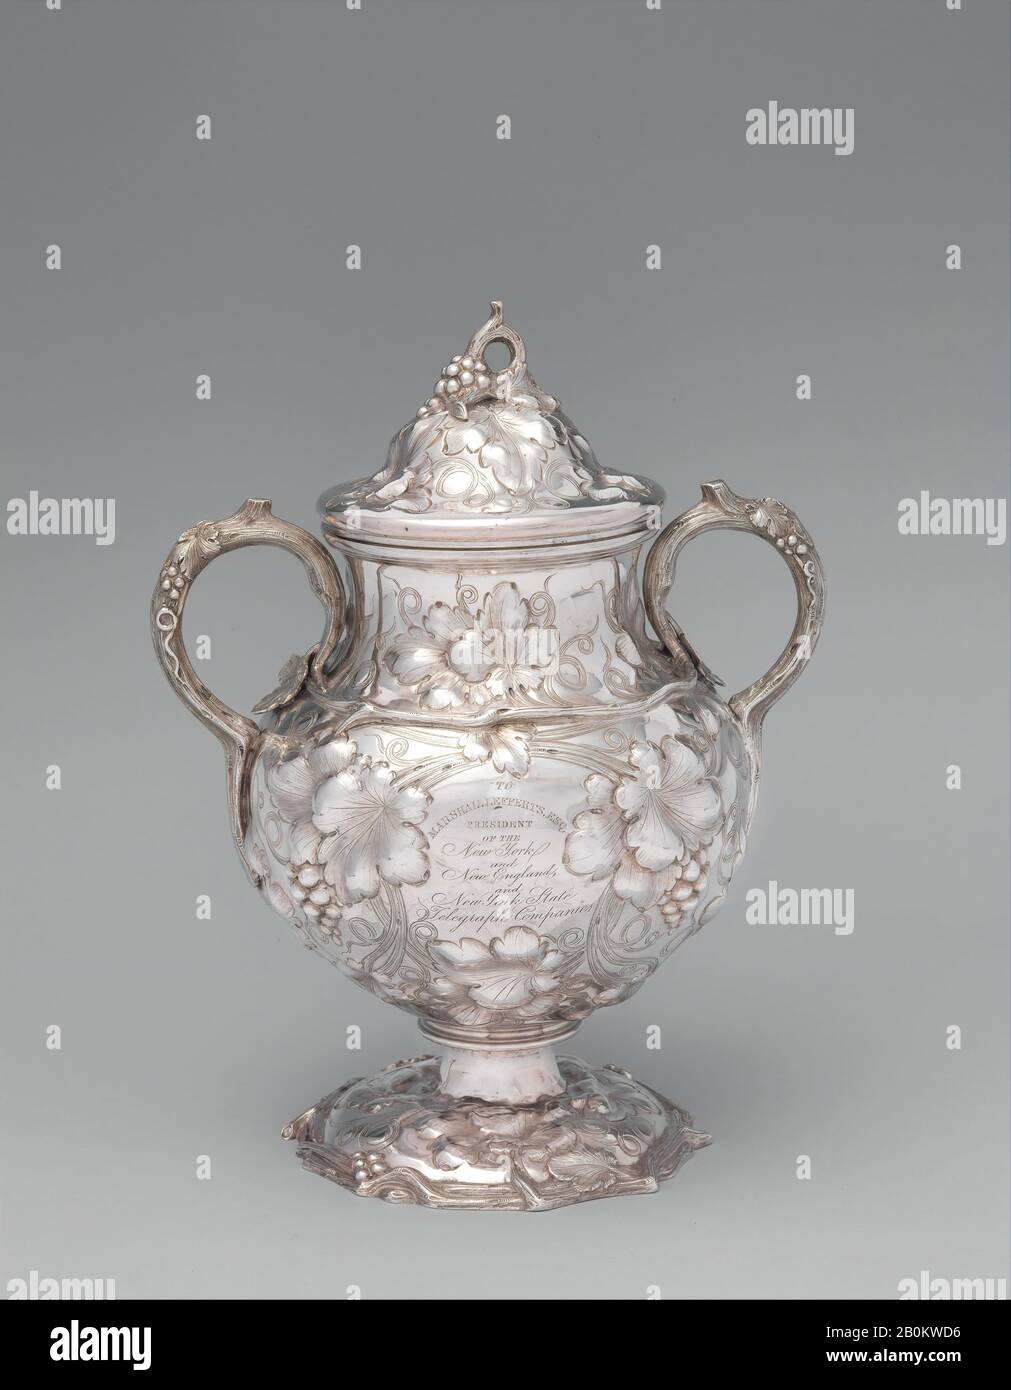 John C. Moore, Sugar Bowl, American, John C. Moore (ca. 1802–1874), 1850, Made in New York, New York, United States, American, Silver, Overall: 8 15/16 x 7 1/8 x 5 5/16 in. (22.7 x 18.1 x 13.5 cm); 25 oz. (776.9 g), Foot: Diam. 4 11/16 in. (11.9 cm), Body: H. 7 1/8 in. (18.1 cm); 21 oz. 8 dwt. (664.9 g), Cover: 2 1/8 x 3 9/16 in. (5.4 x 9 cm); 3 oz. 12 dwt. (112 g), Silver Stock Photo